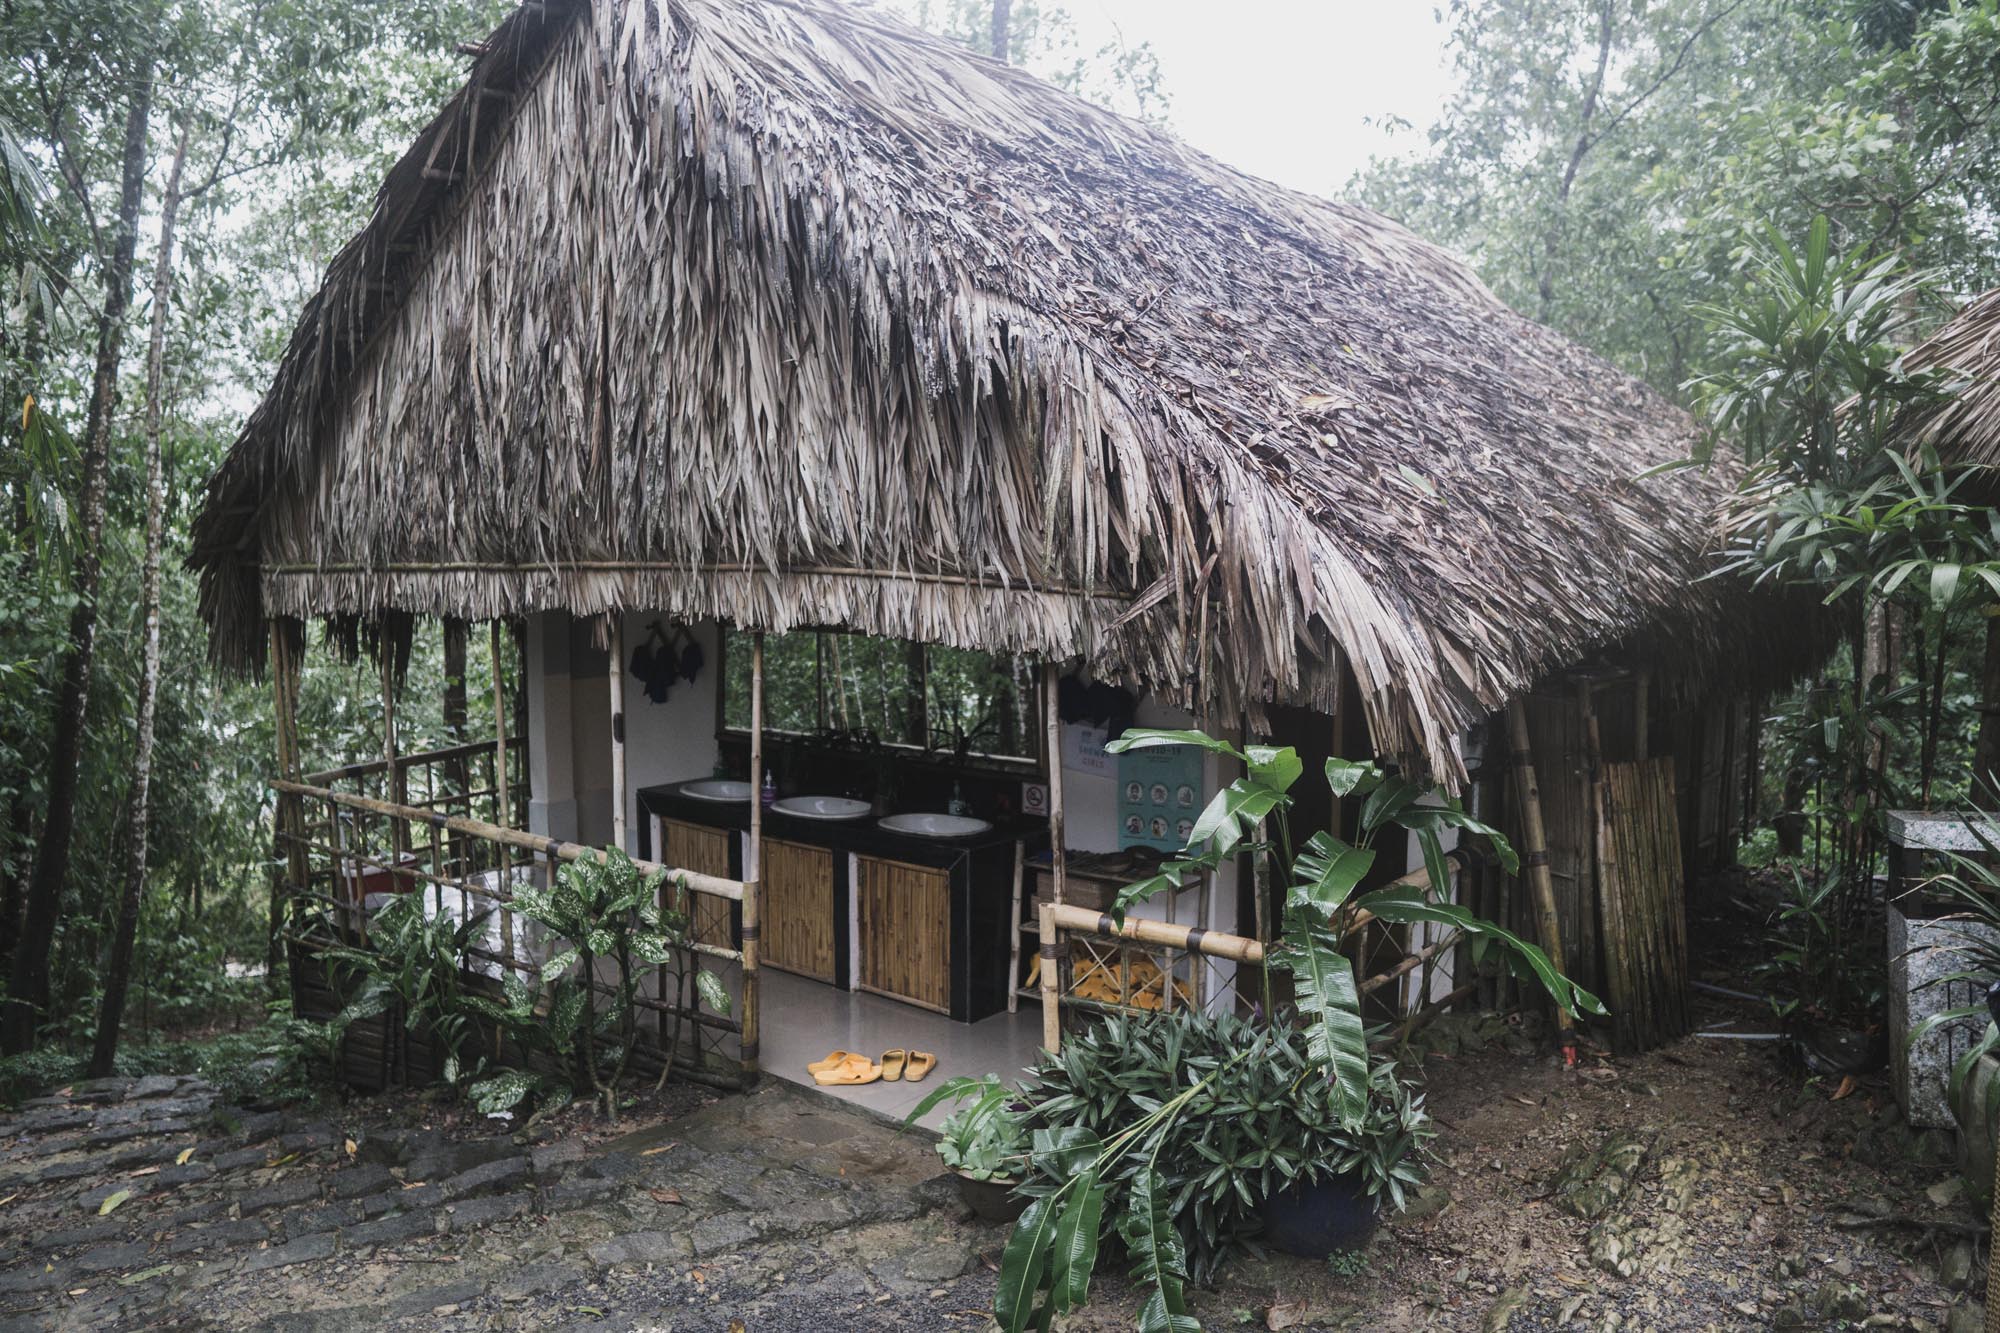 Chill out in nature at Tai Lai Longhouse in Cat Tien National Park, a five-hour bus ride away from Ho Chi Minh City. Photo by Nam Quoc Tran